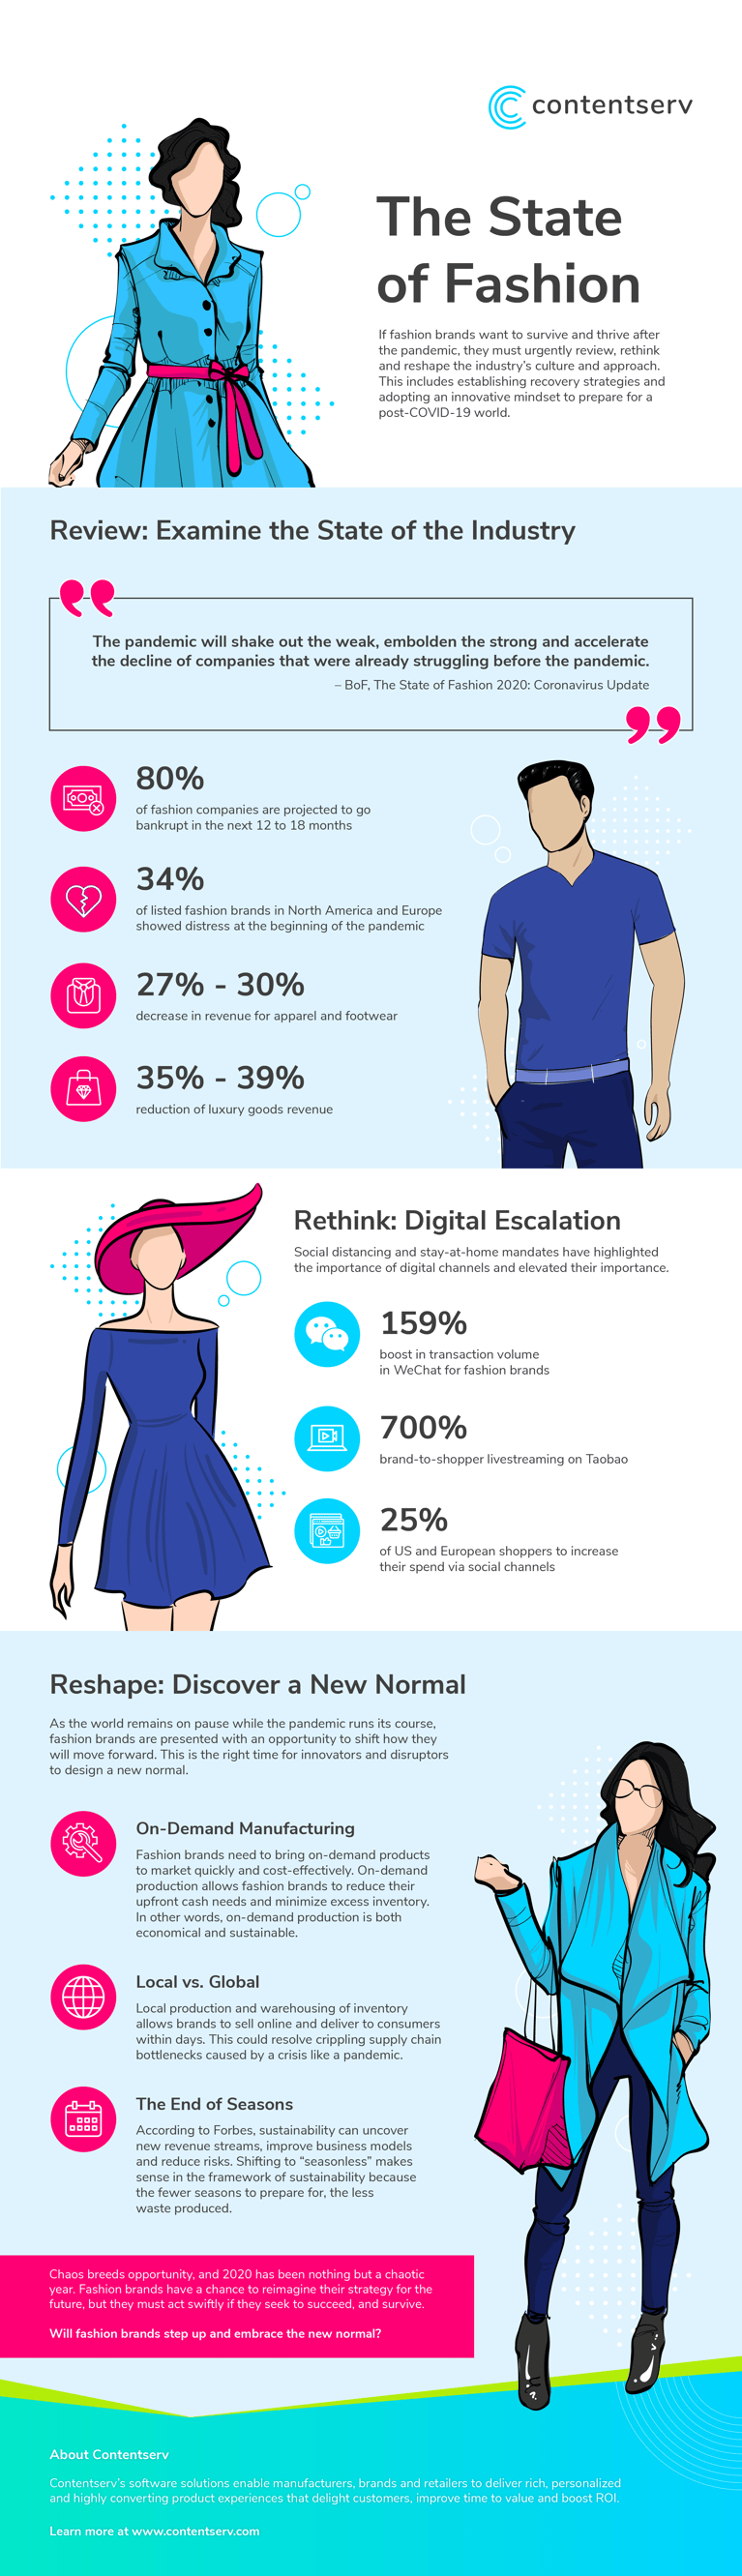 Infographic: Fashion Brands: Review, Rethink, Reshape